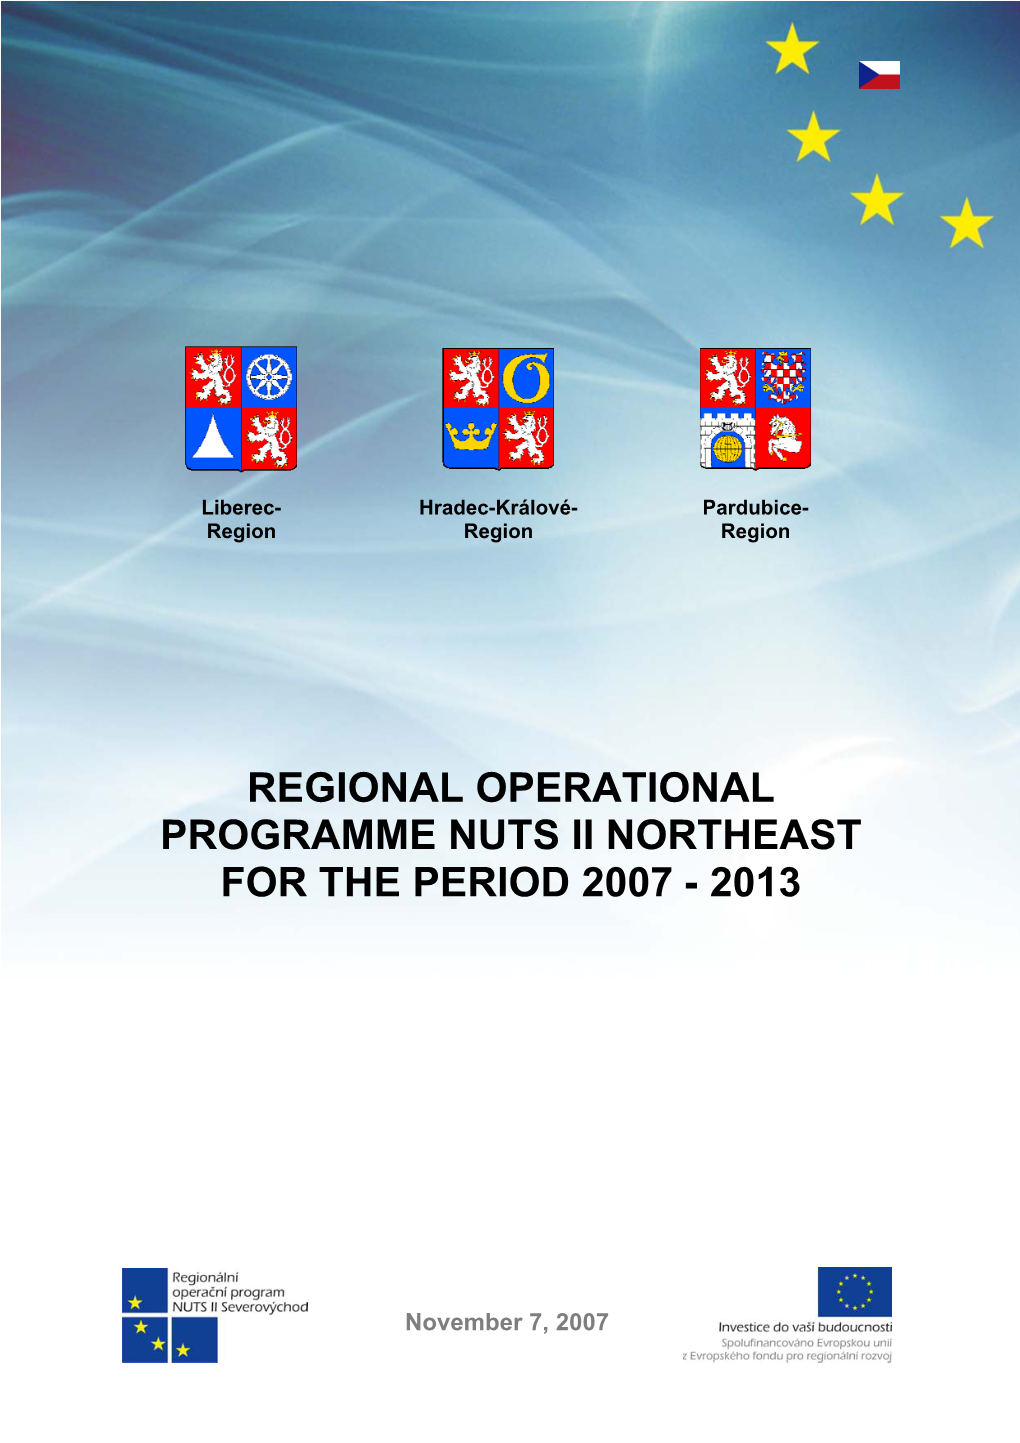 Regional Operational Programme Nuts Ii Northeast for the Period 2007 - 2013